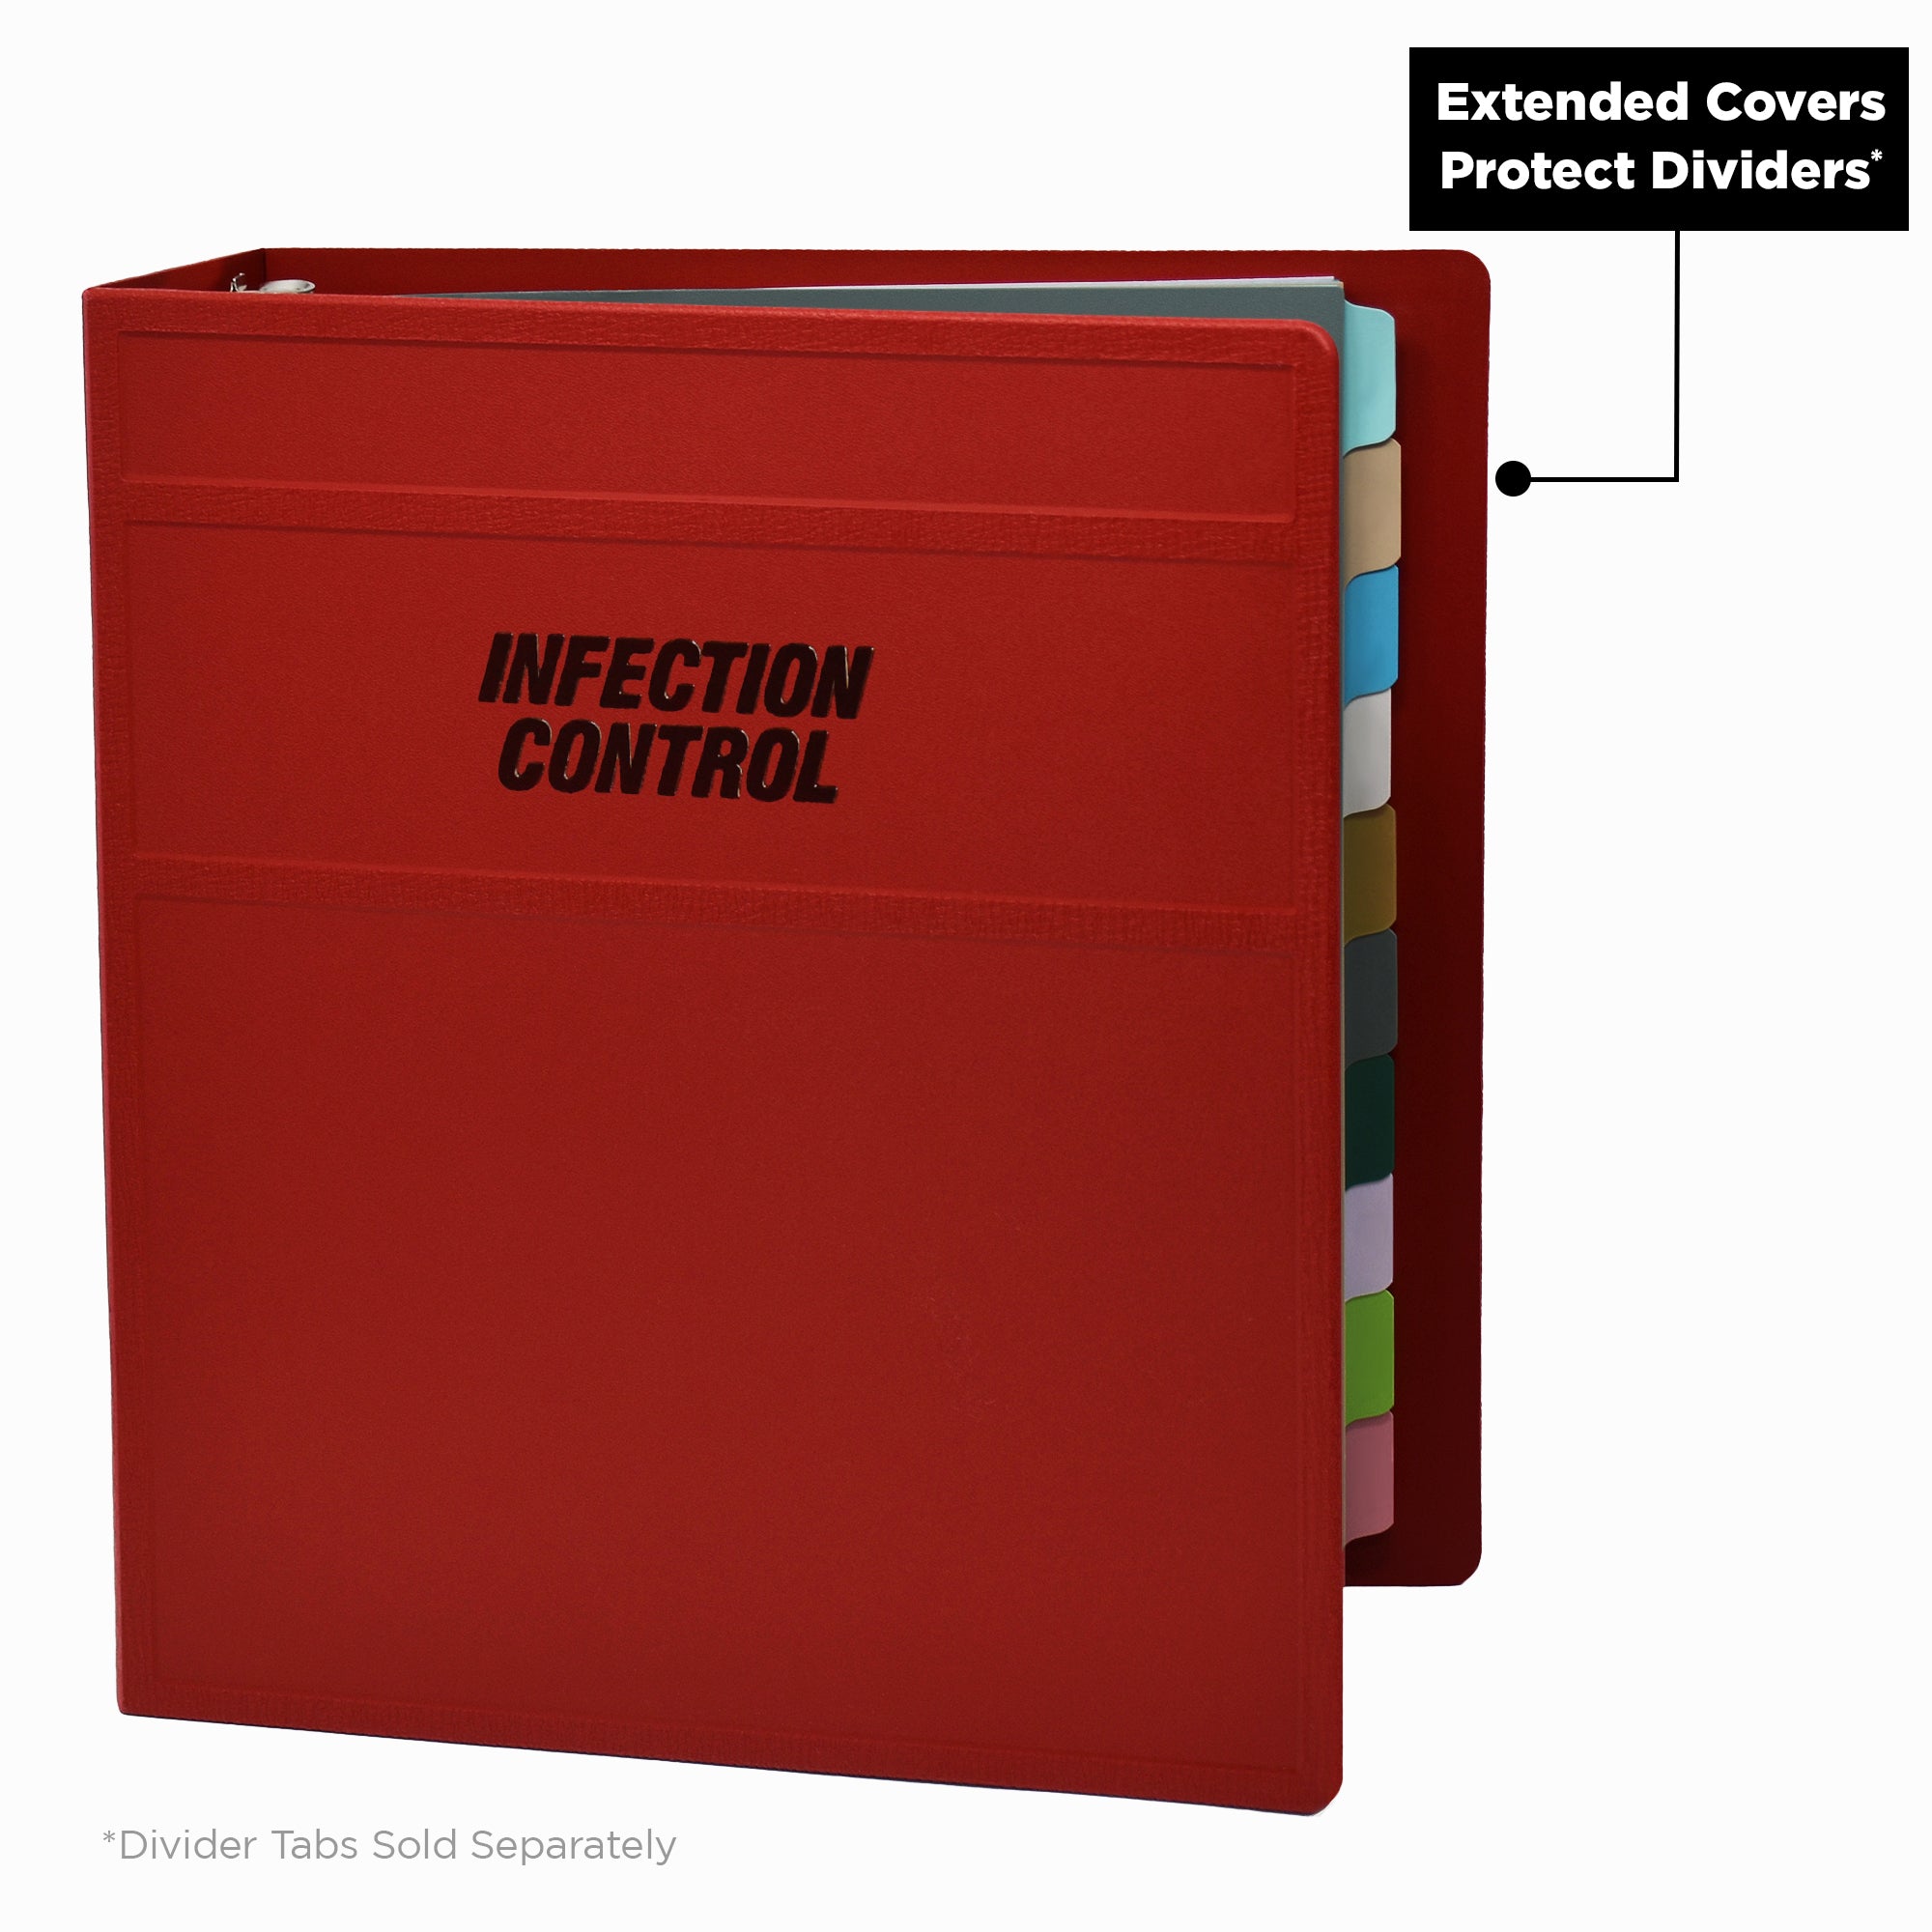 2-Inch Heavy Duty 3-Ring Binder for Infection Control Manual – Side Opening